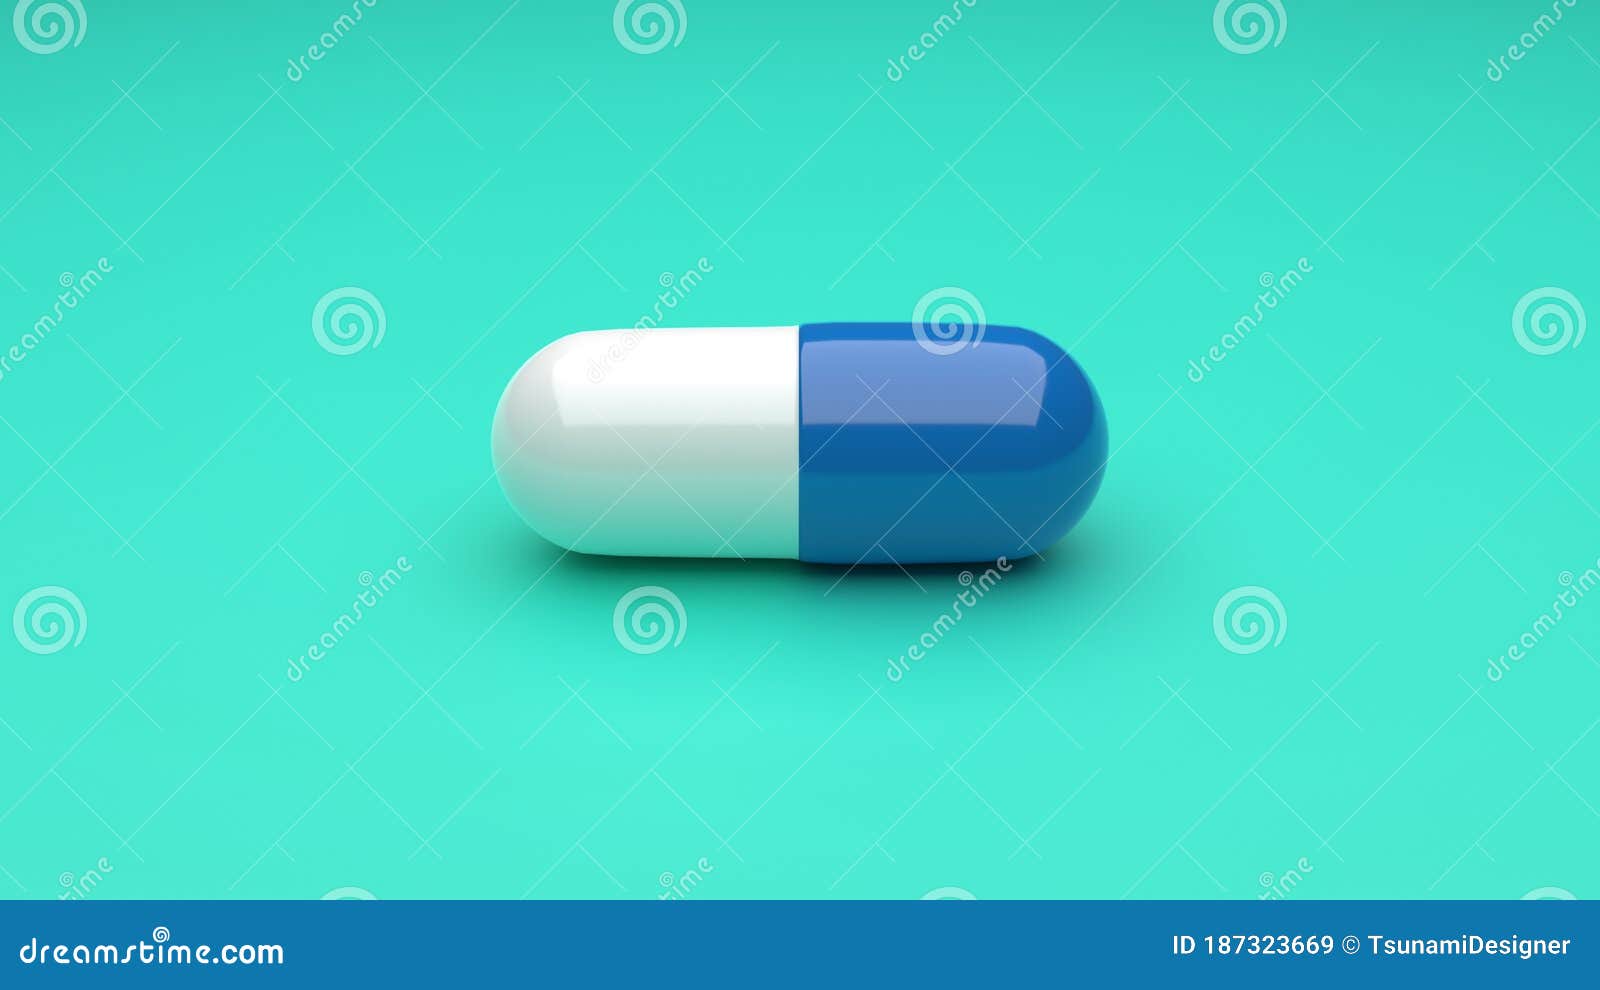 White Blue Pills Isolated On Green Background Stock Illustration Illustration Of Abstract